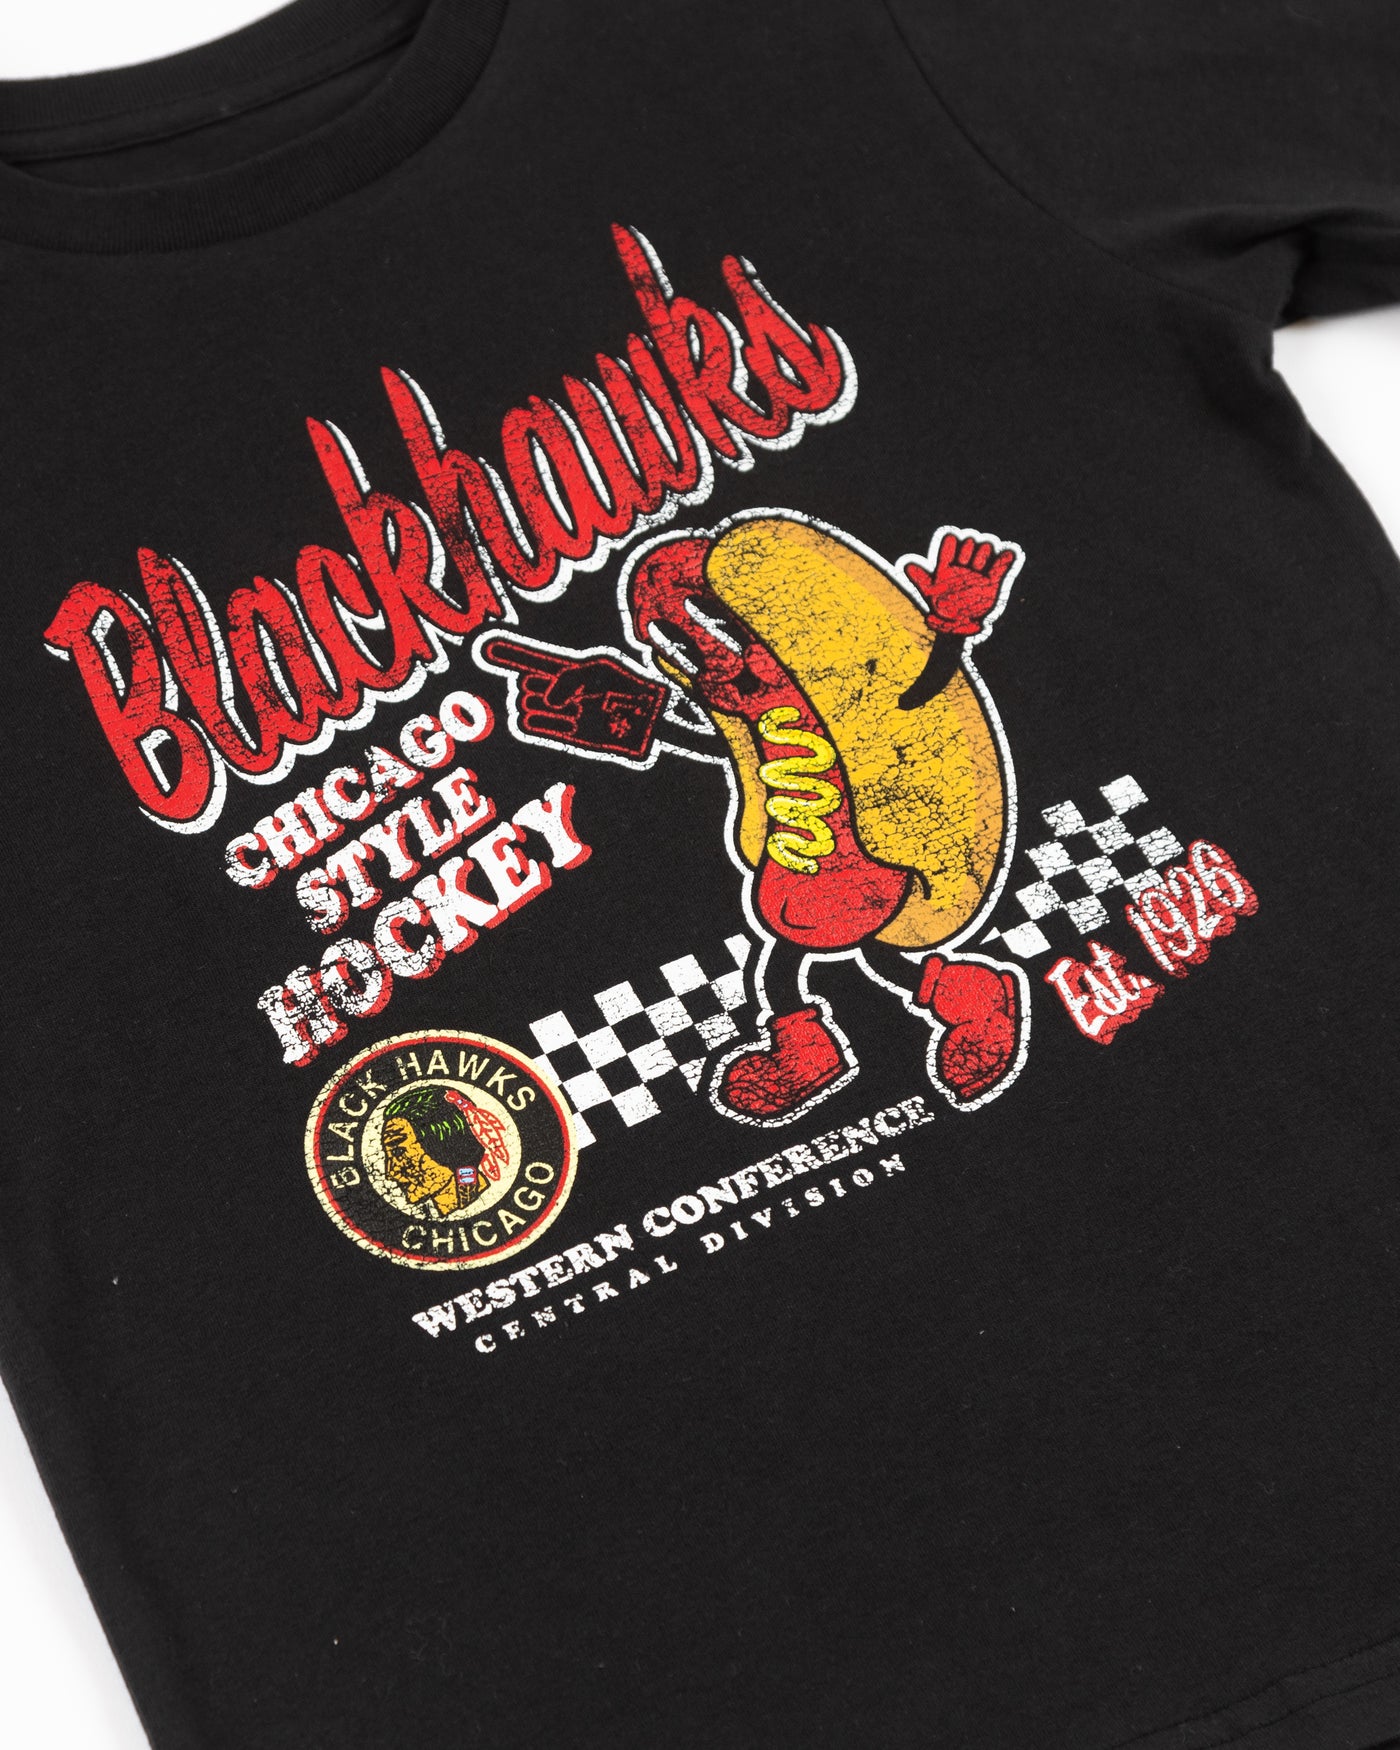 black kids size Mitchell & Ness tee with Chicago Blackhawks vintage logo and animated hot dog graphic - alt detail lay flat